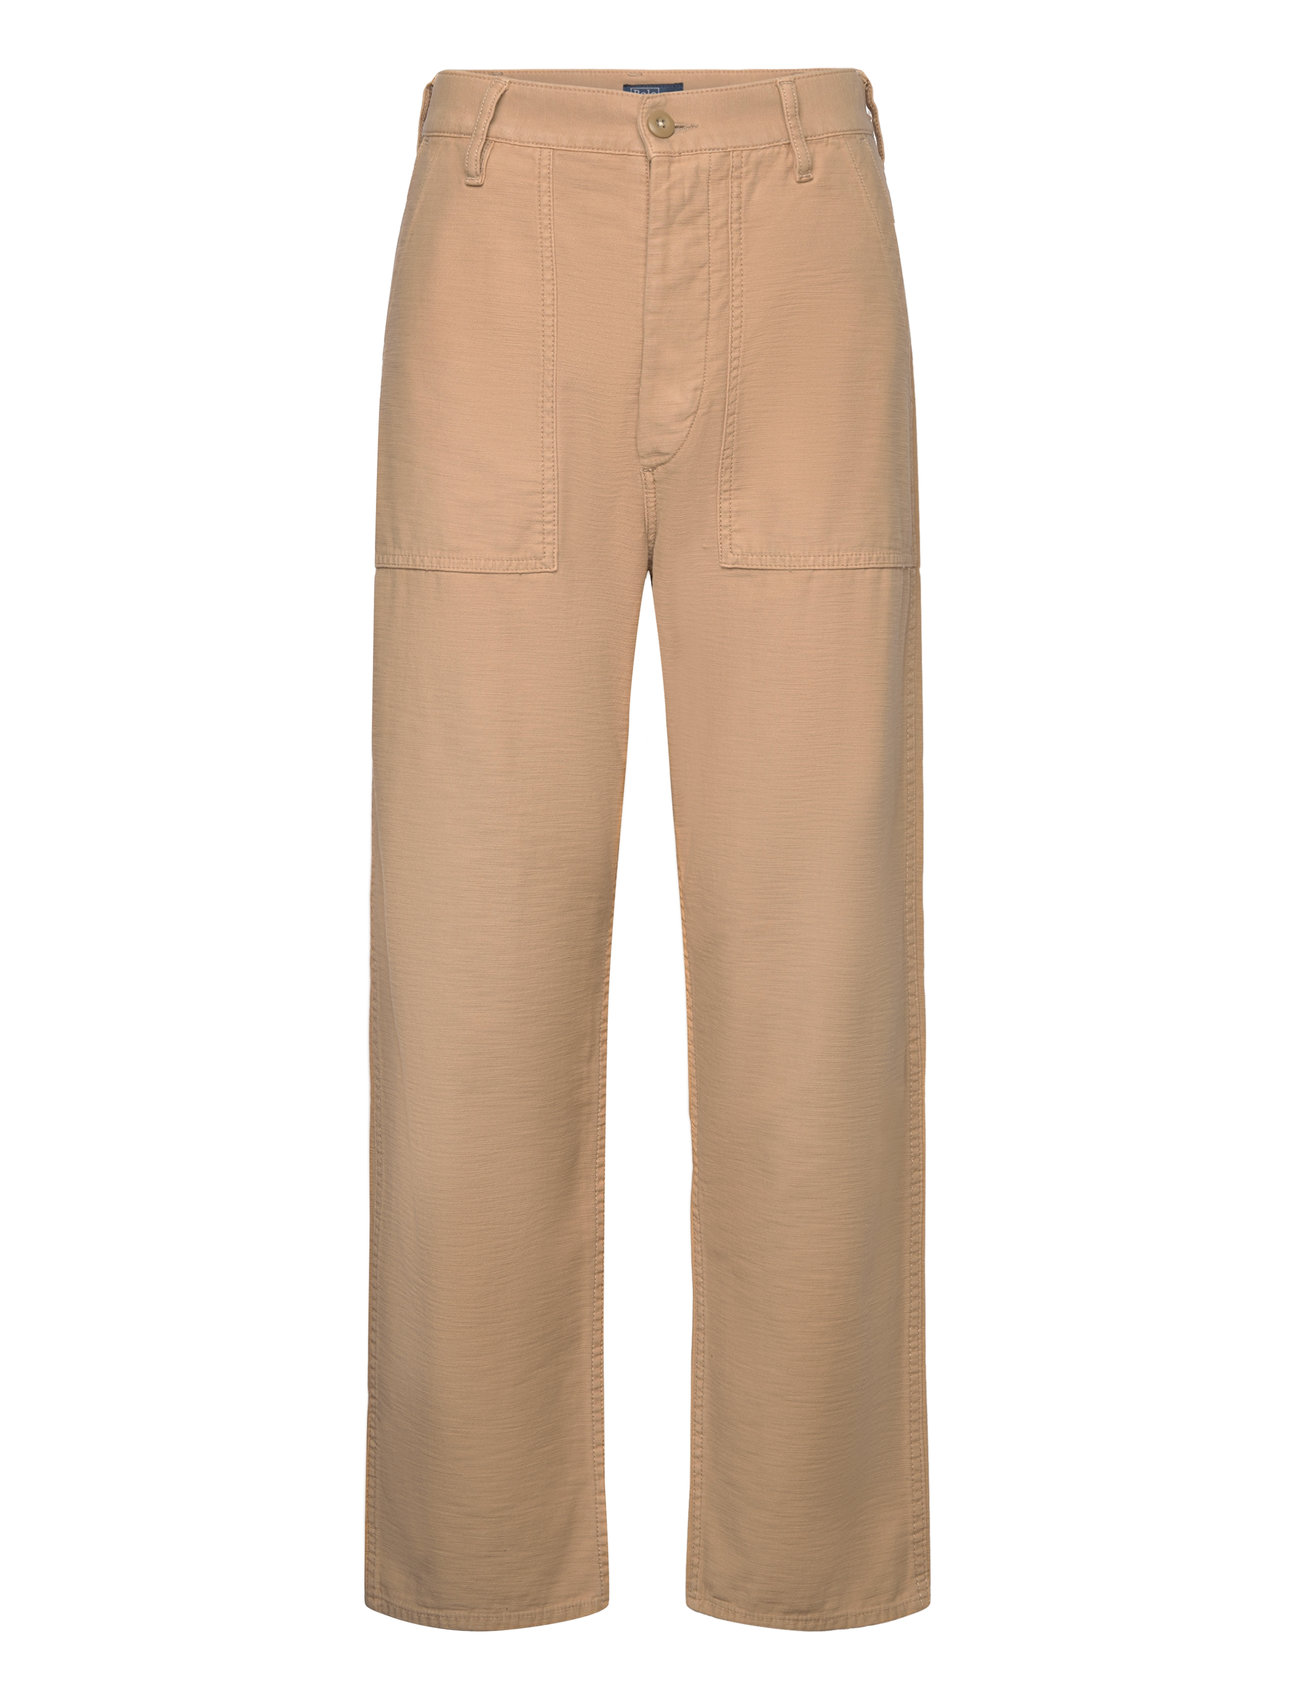 Cotton Sateen Utility Pant Bottoms Trousers Chinos Beige Polo Ralph Lauren